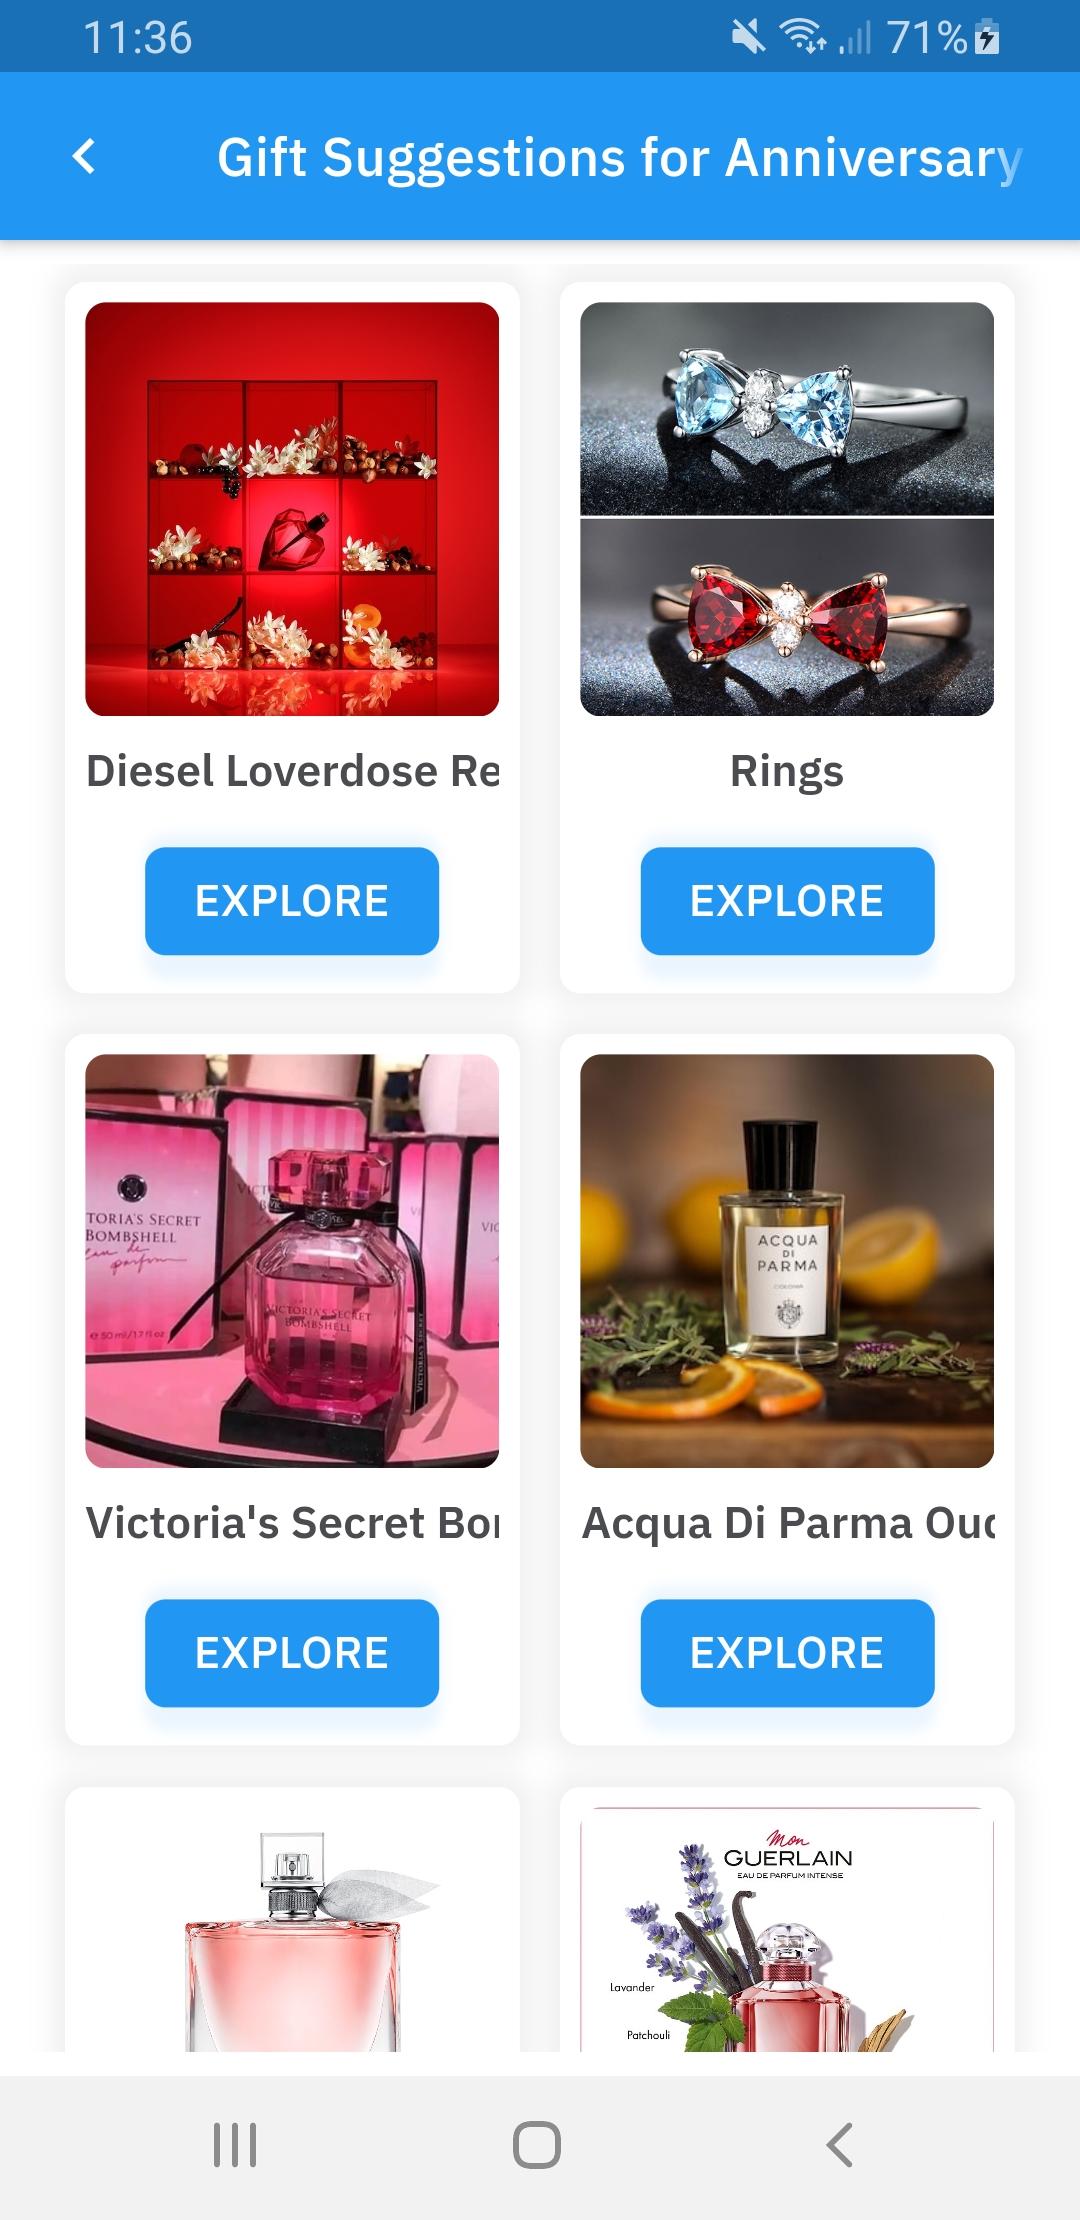 GIFTLY - Gift Ideas & Suggestions 1.0.2 Screenshot 1